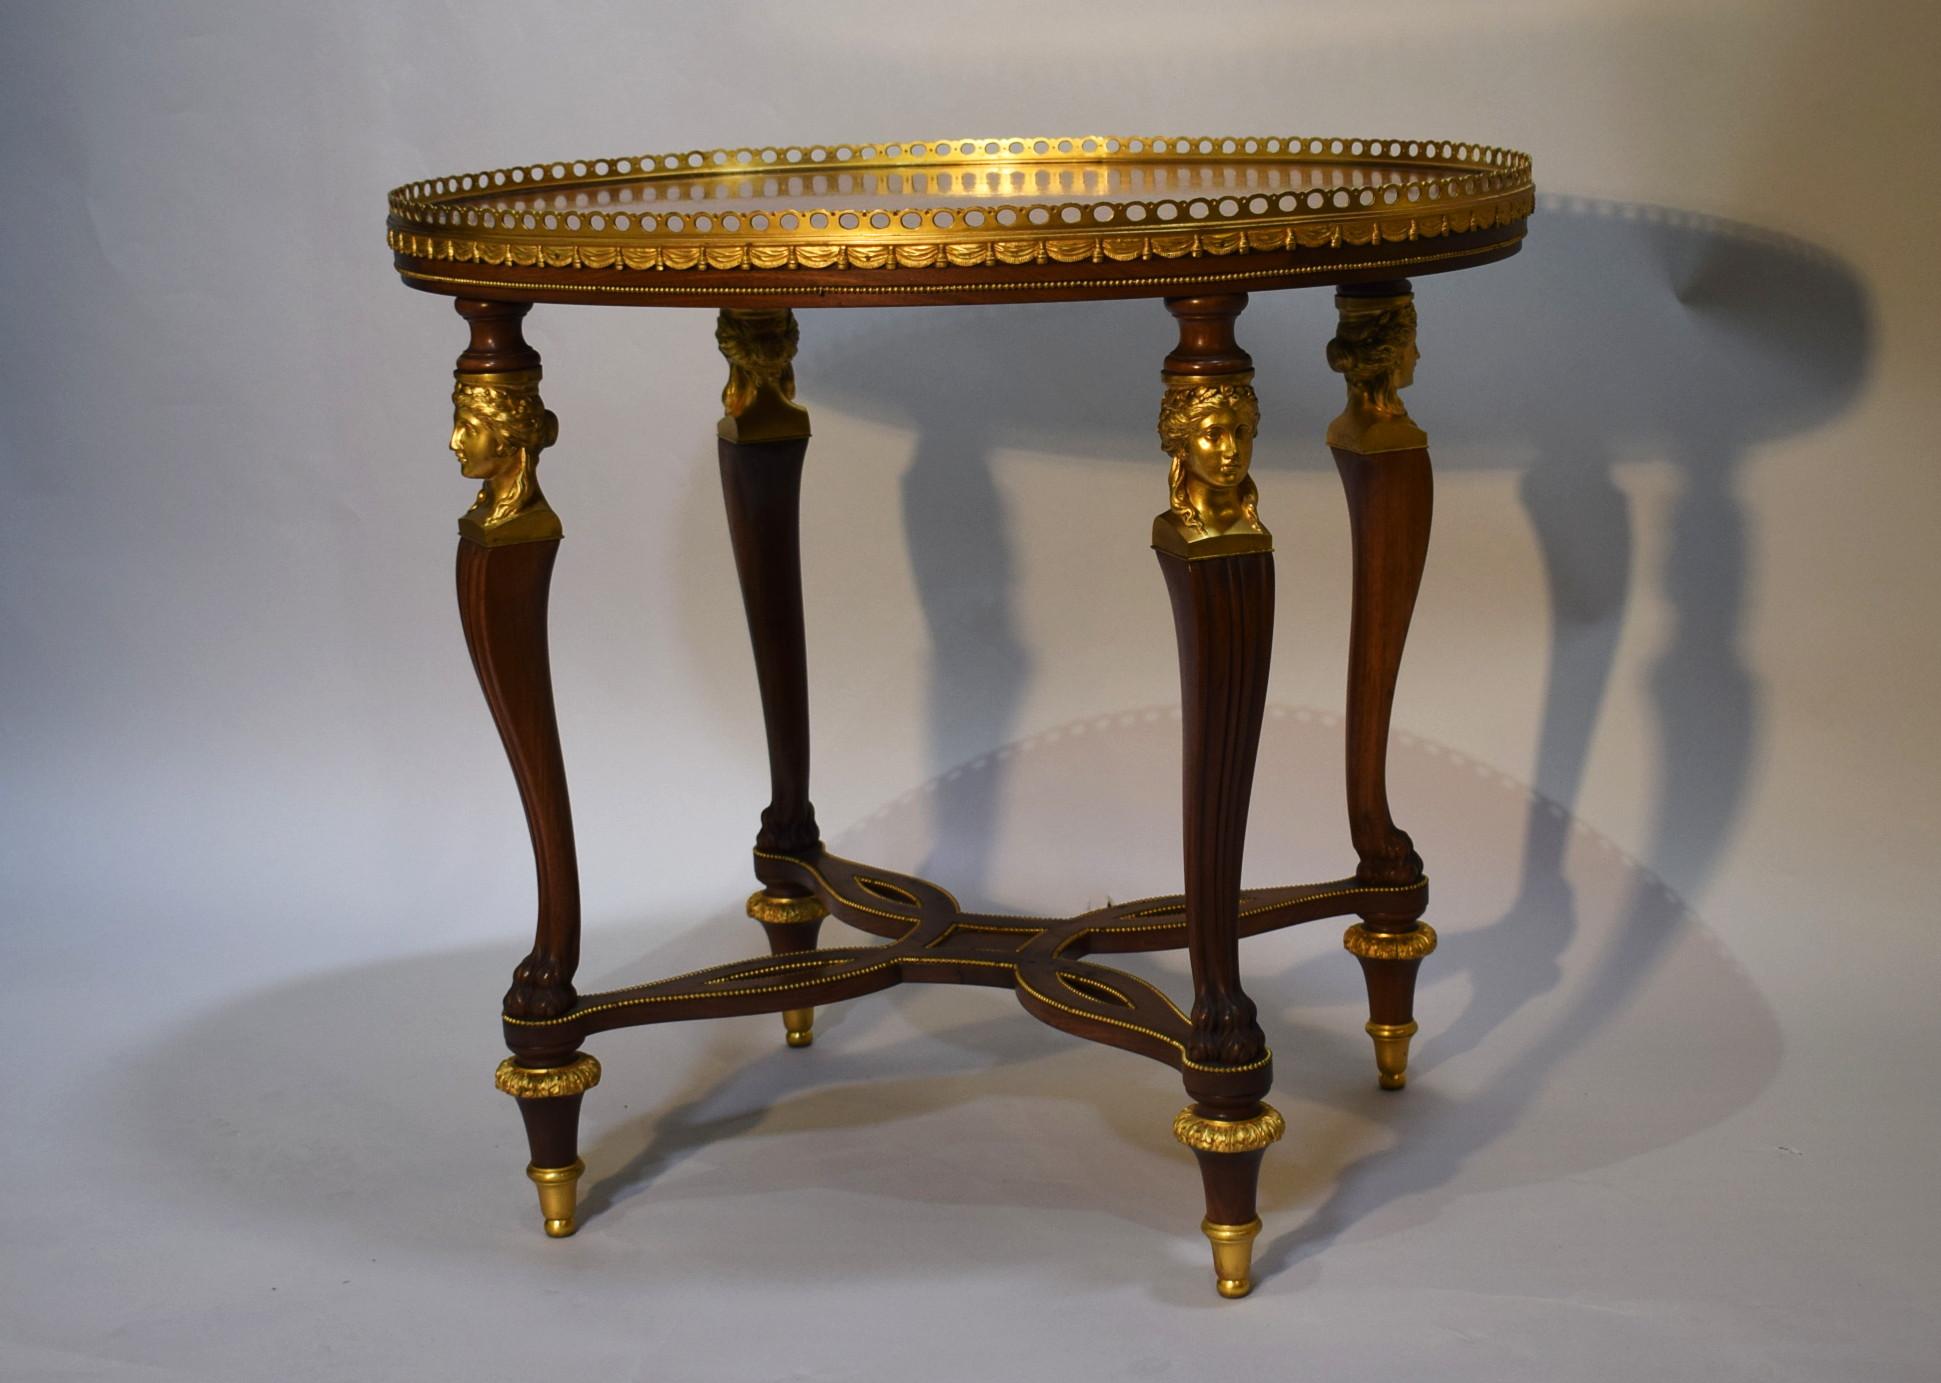 Superb oval shaped ormolu-mounted occasional table with pierced gallery and caryatid mounts on legs.